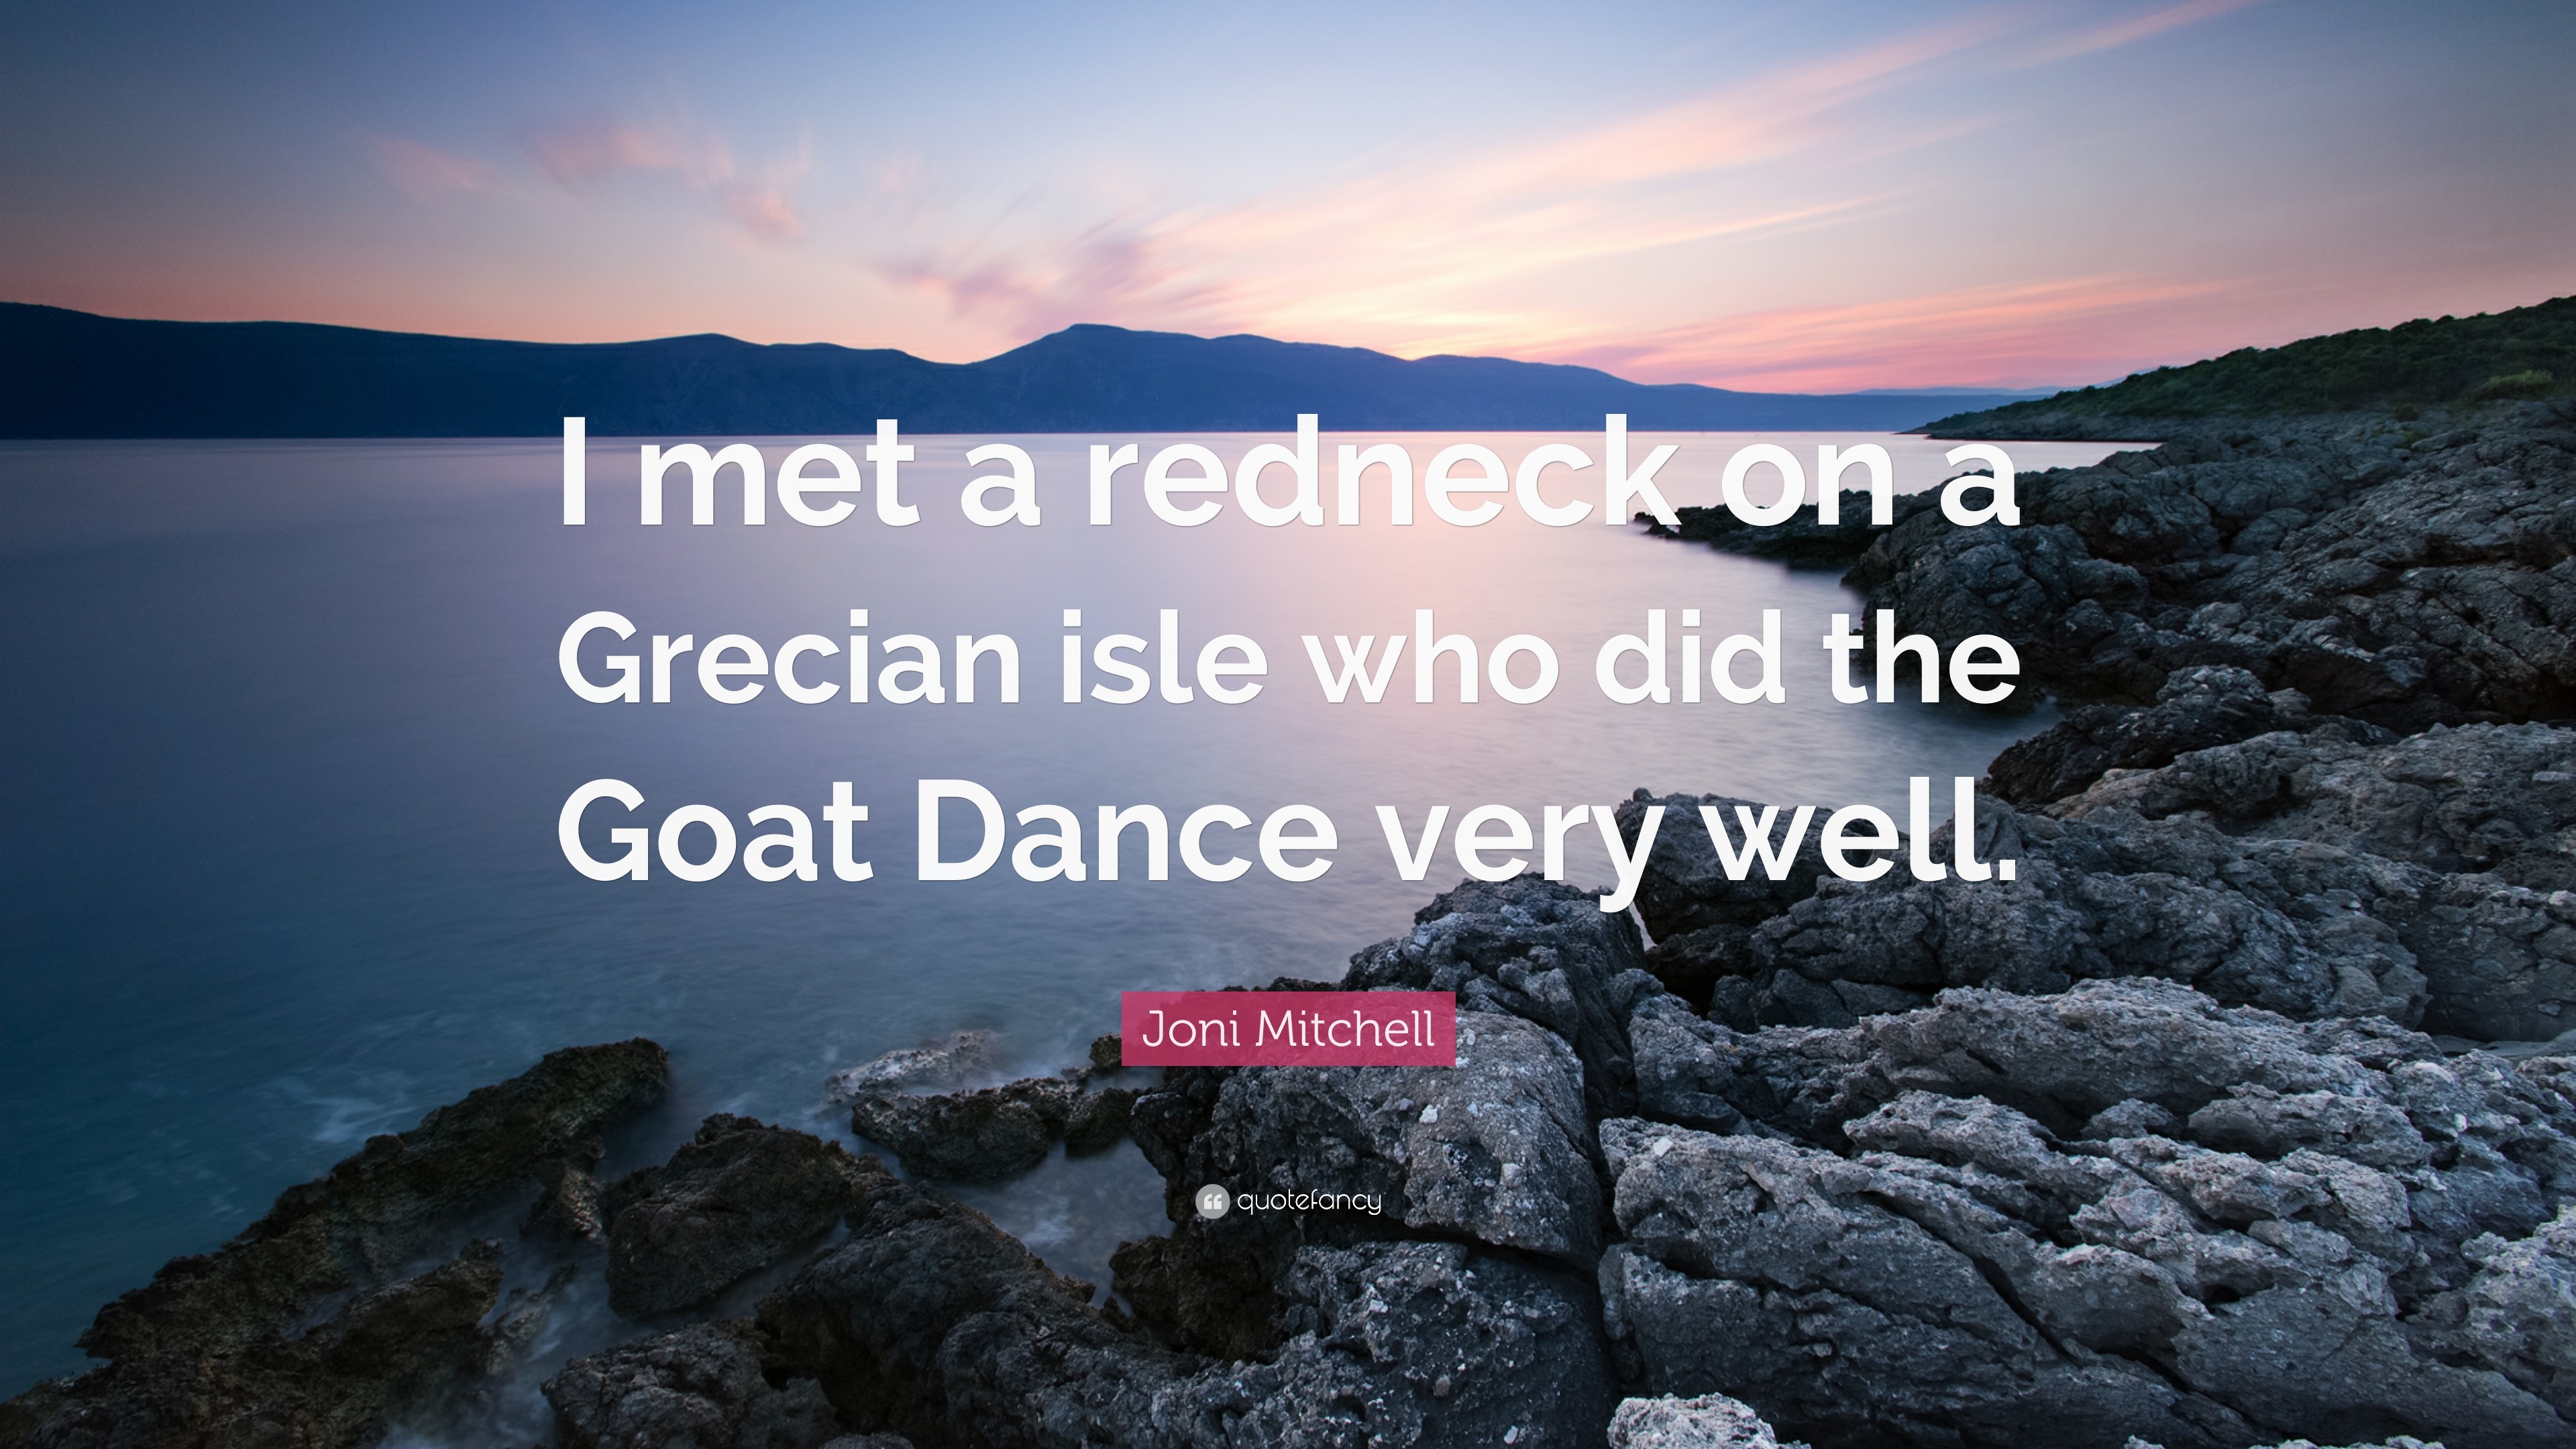 3840x2160 Joni Mitchell Quote: “I met a redneck on a Grecian isle who did the